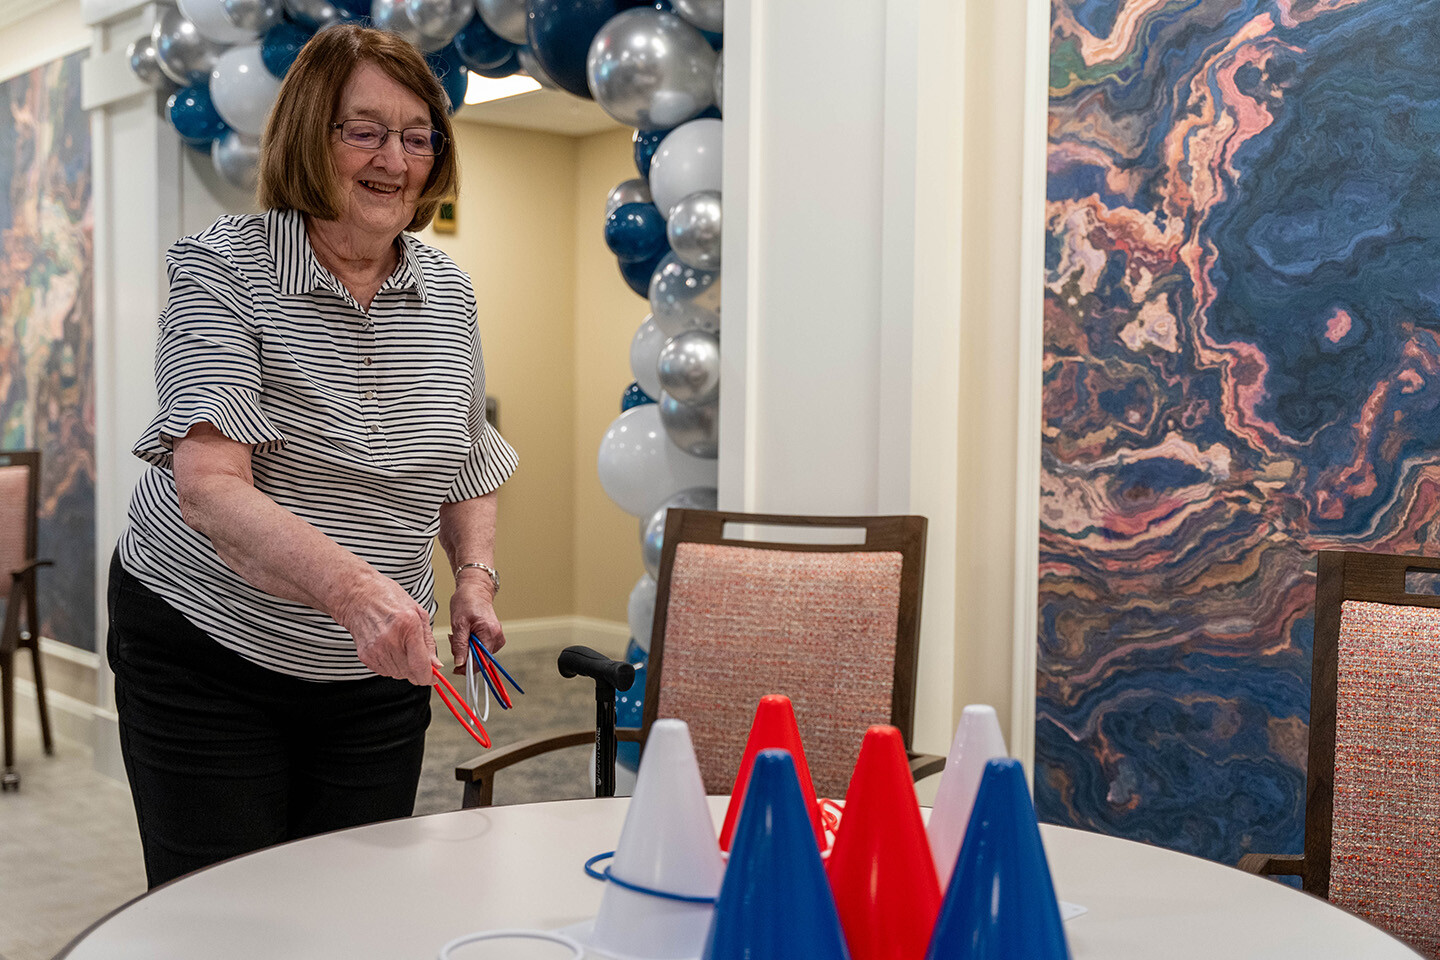 A senior woman plays a ring toss game.